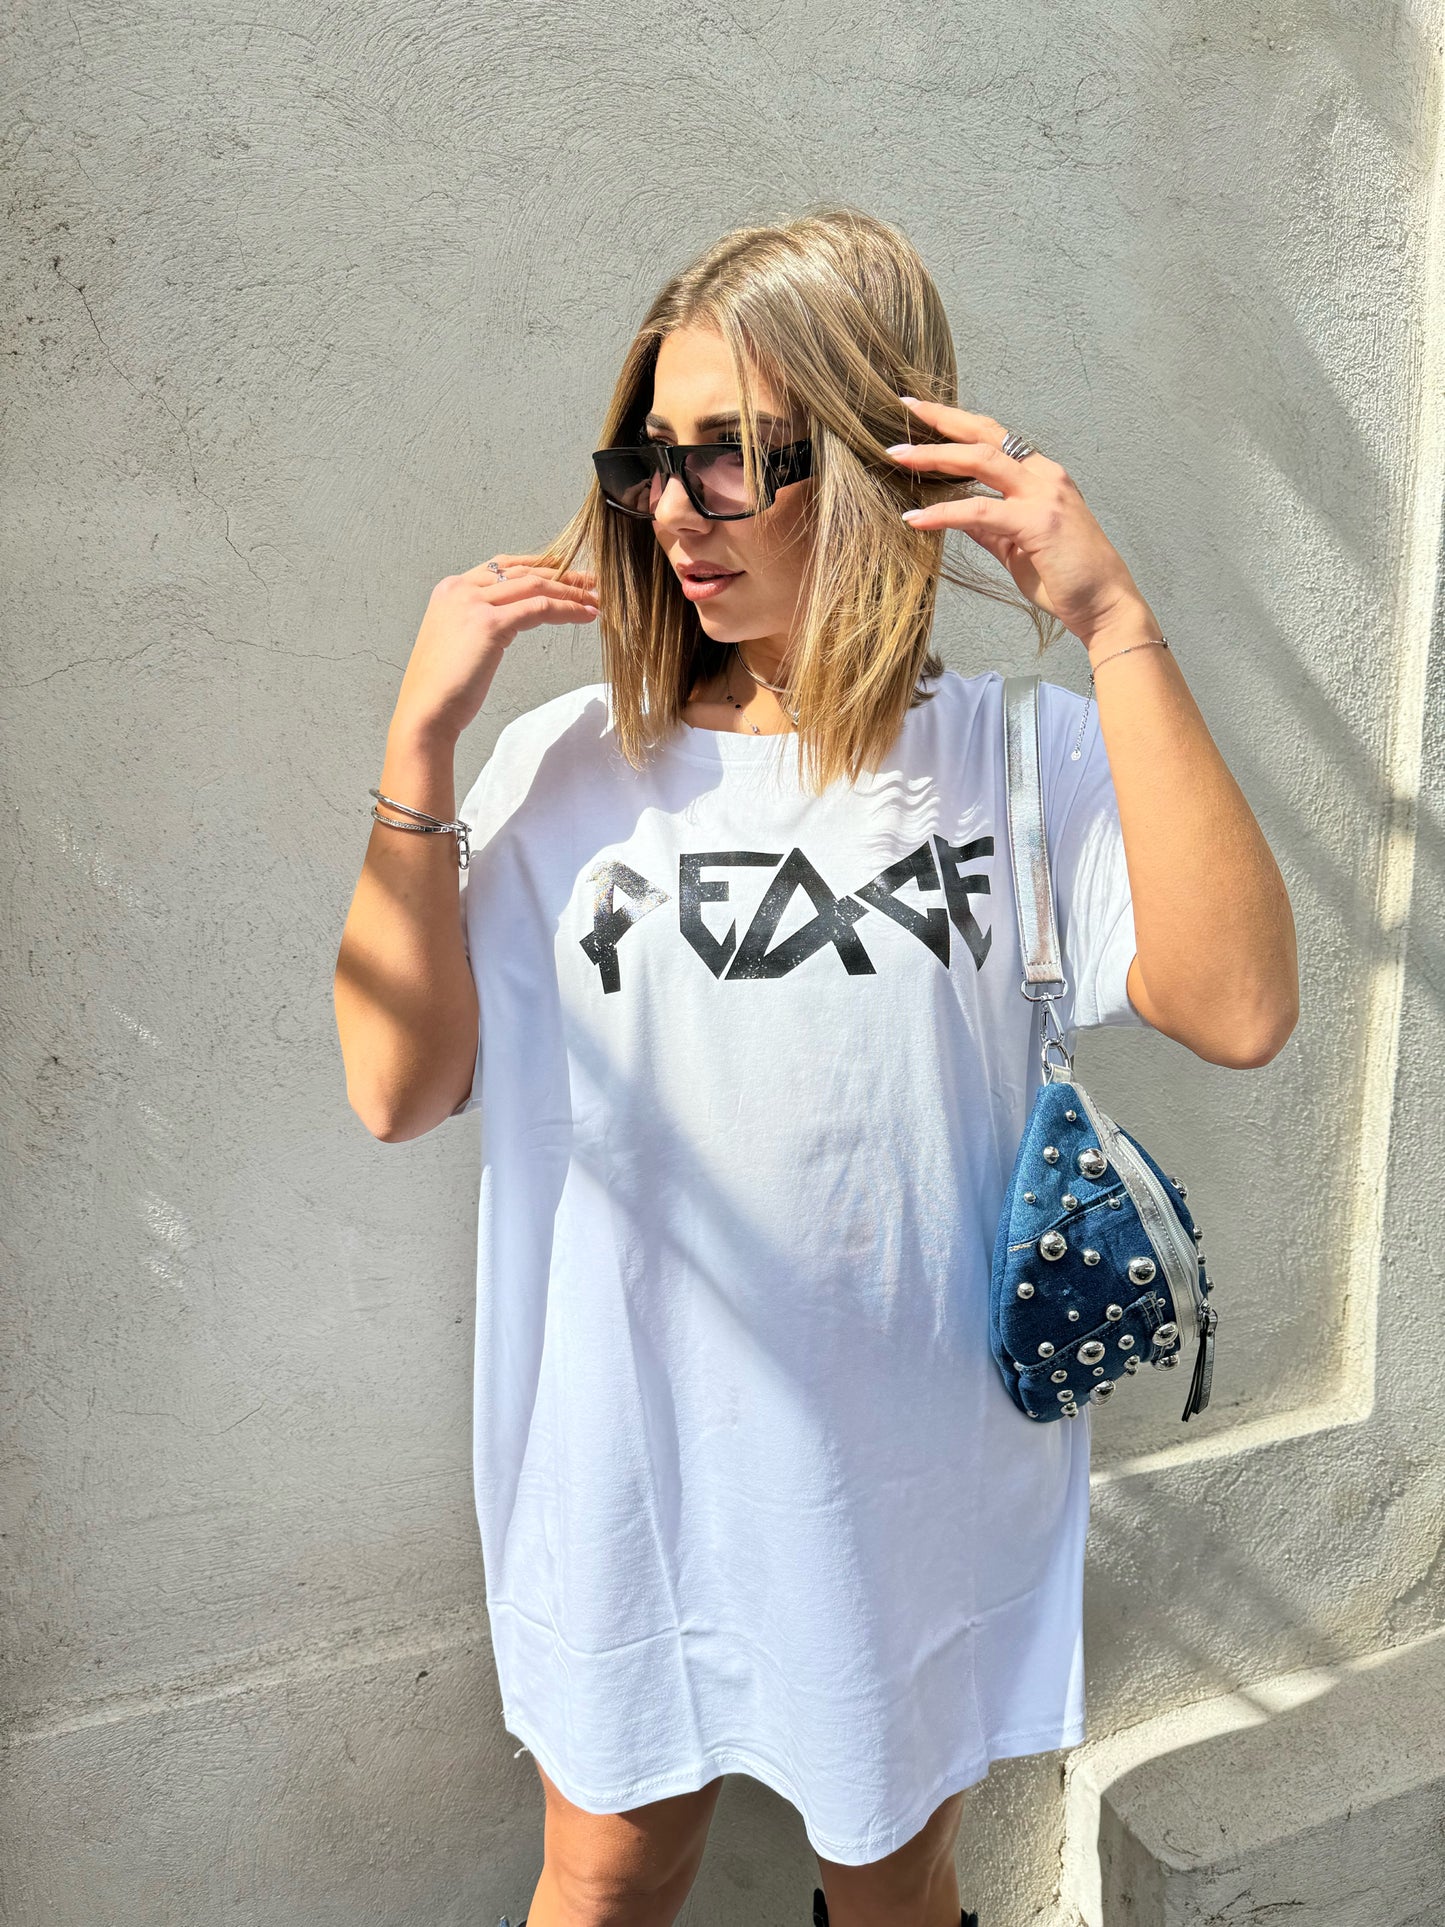 Robe t-shirt oversize peace blanche